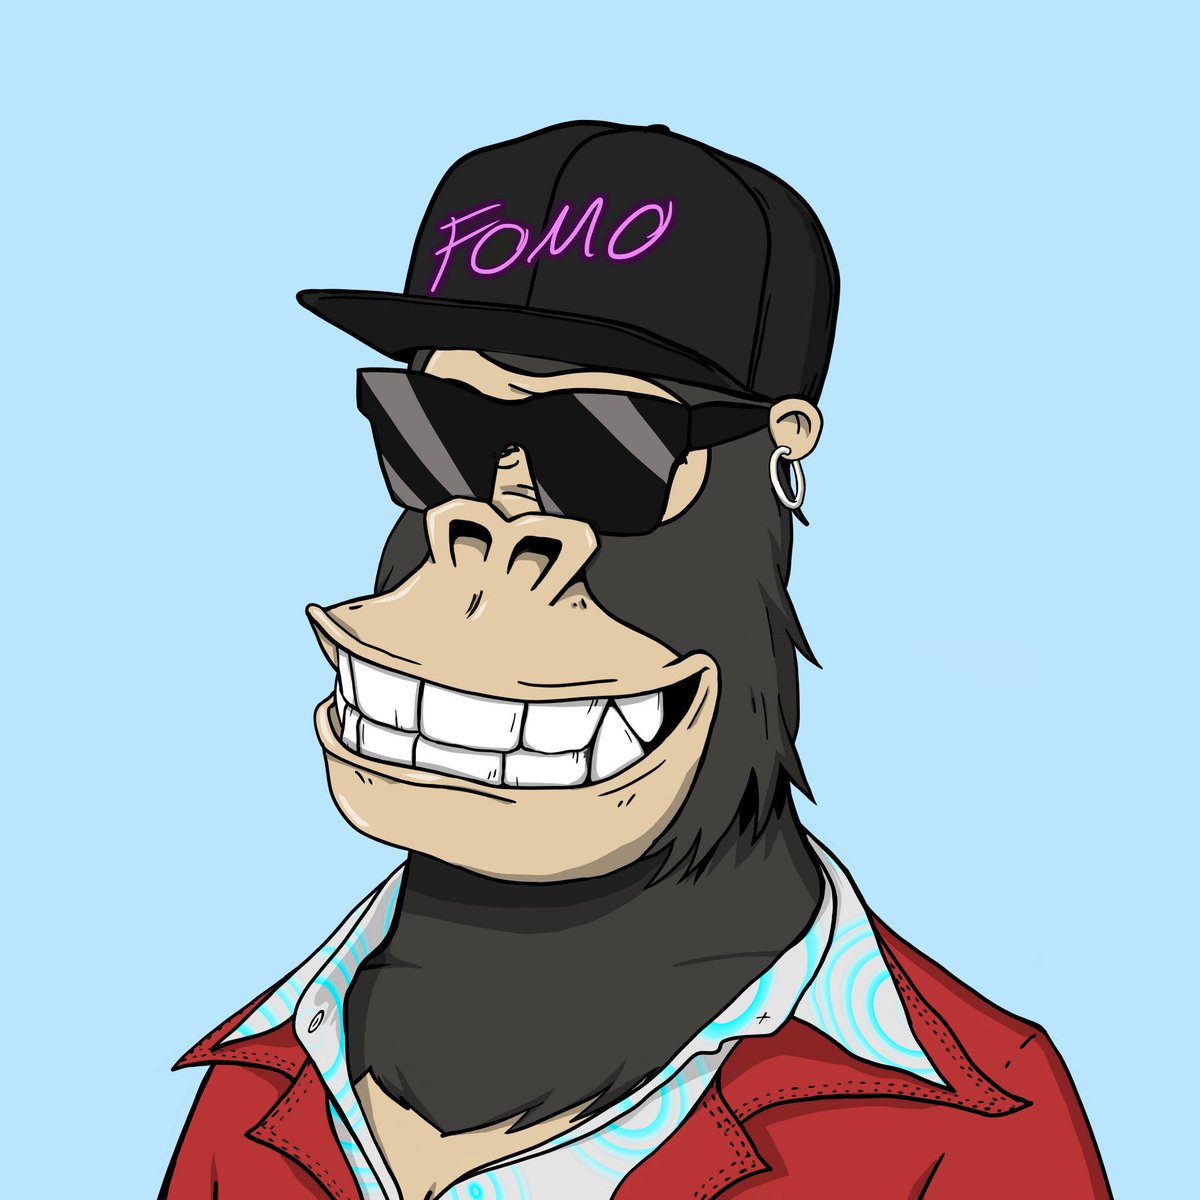 The Kong #FOMO is now 🦍